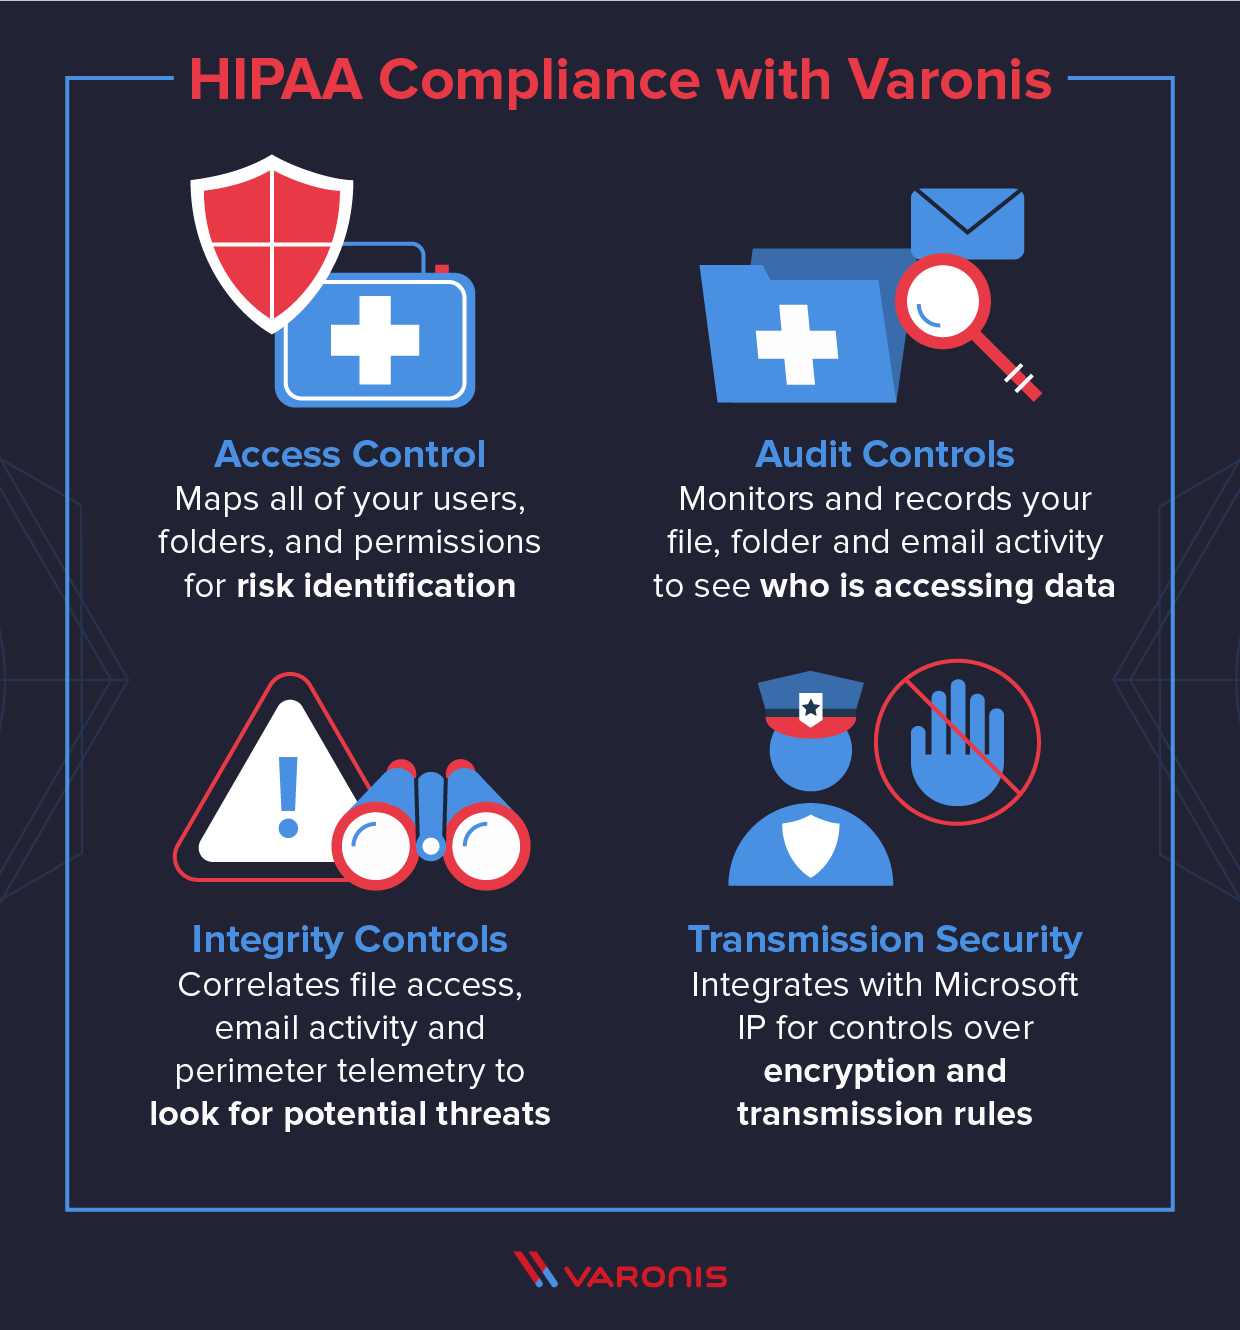 ways to maintain office 365 compliance with Varonis